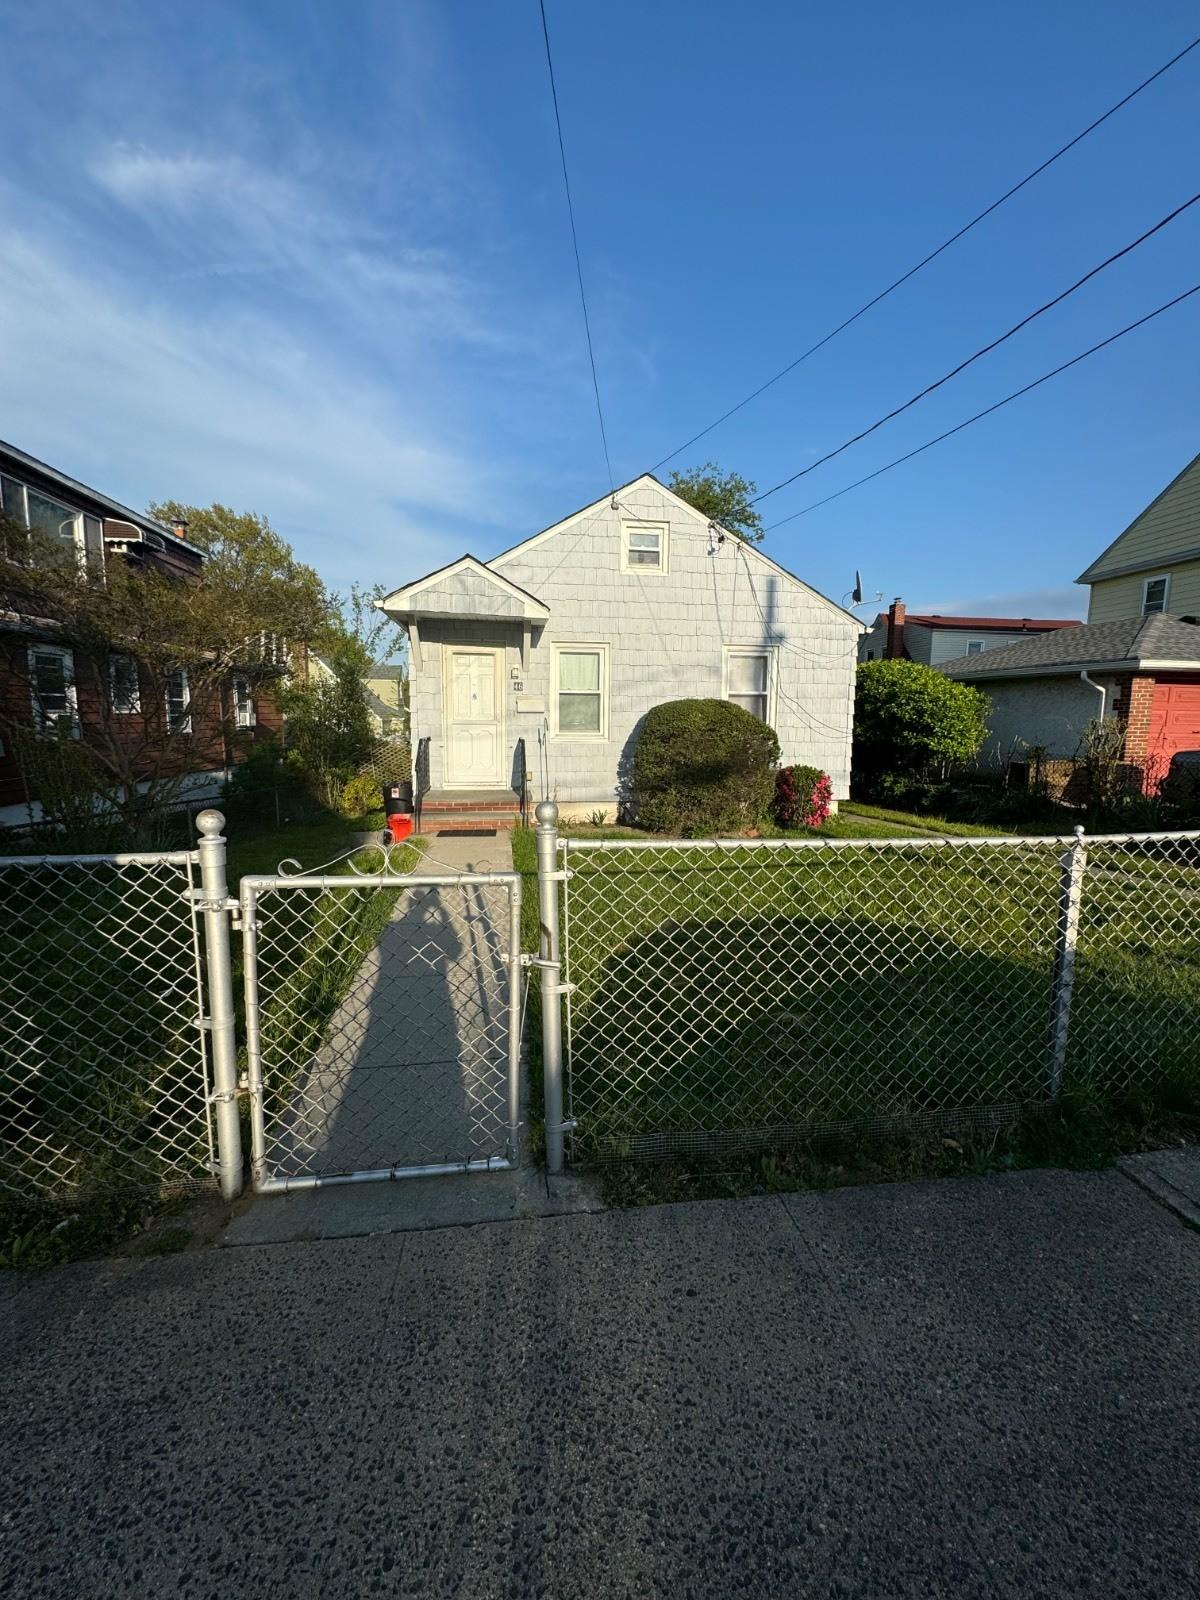 Property Image for 46 1st St